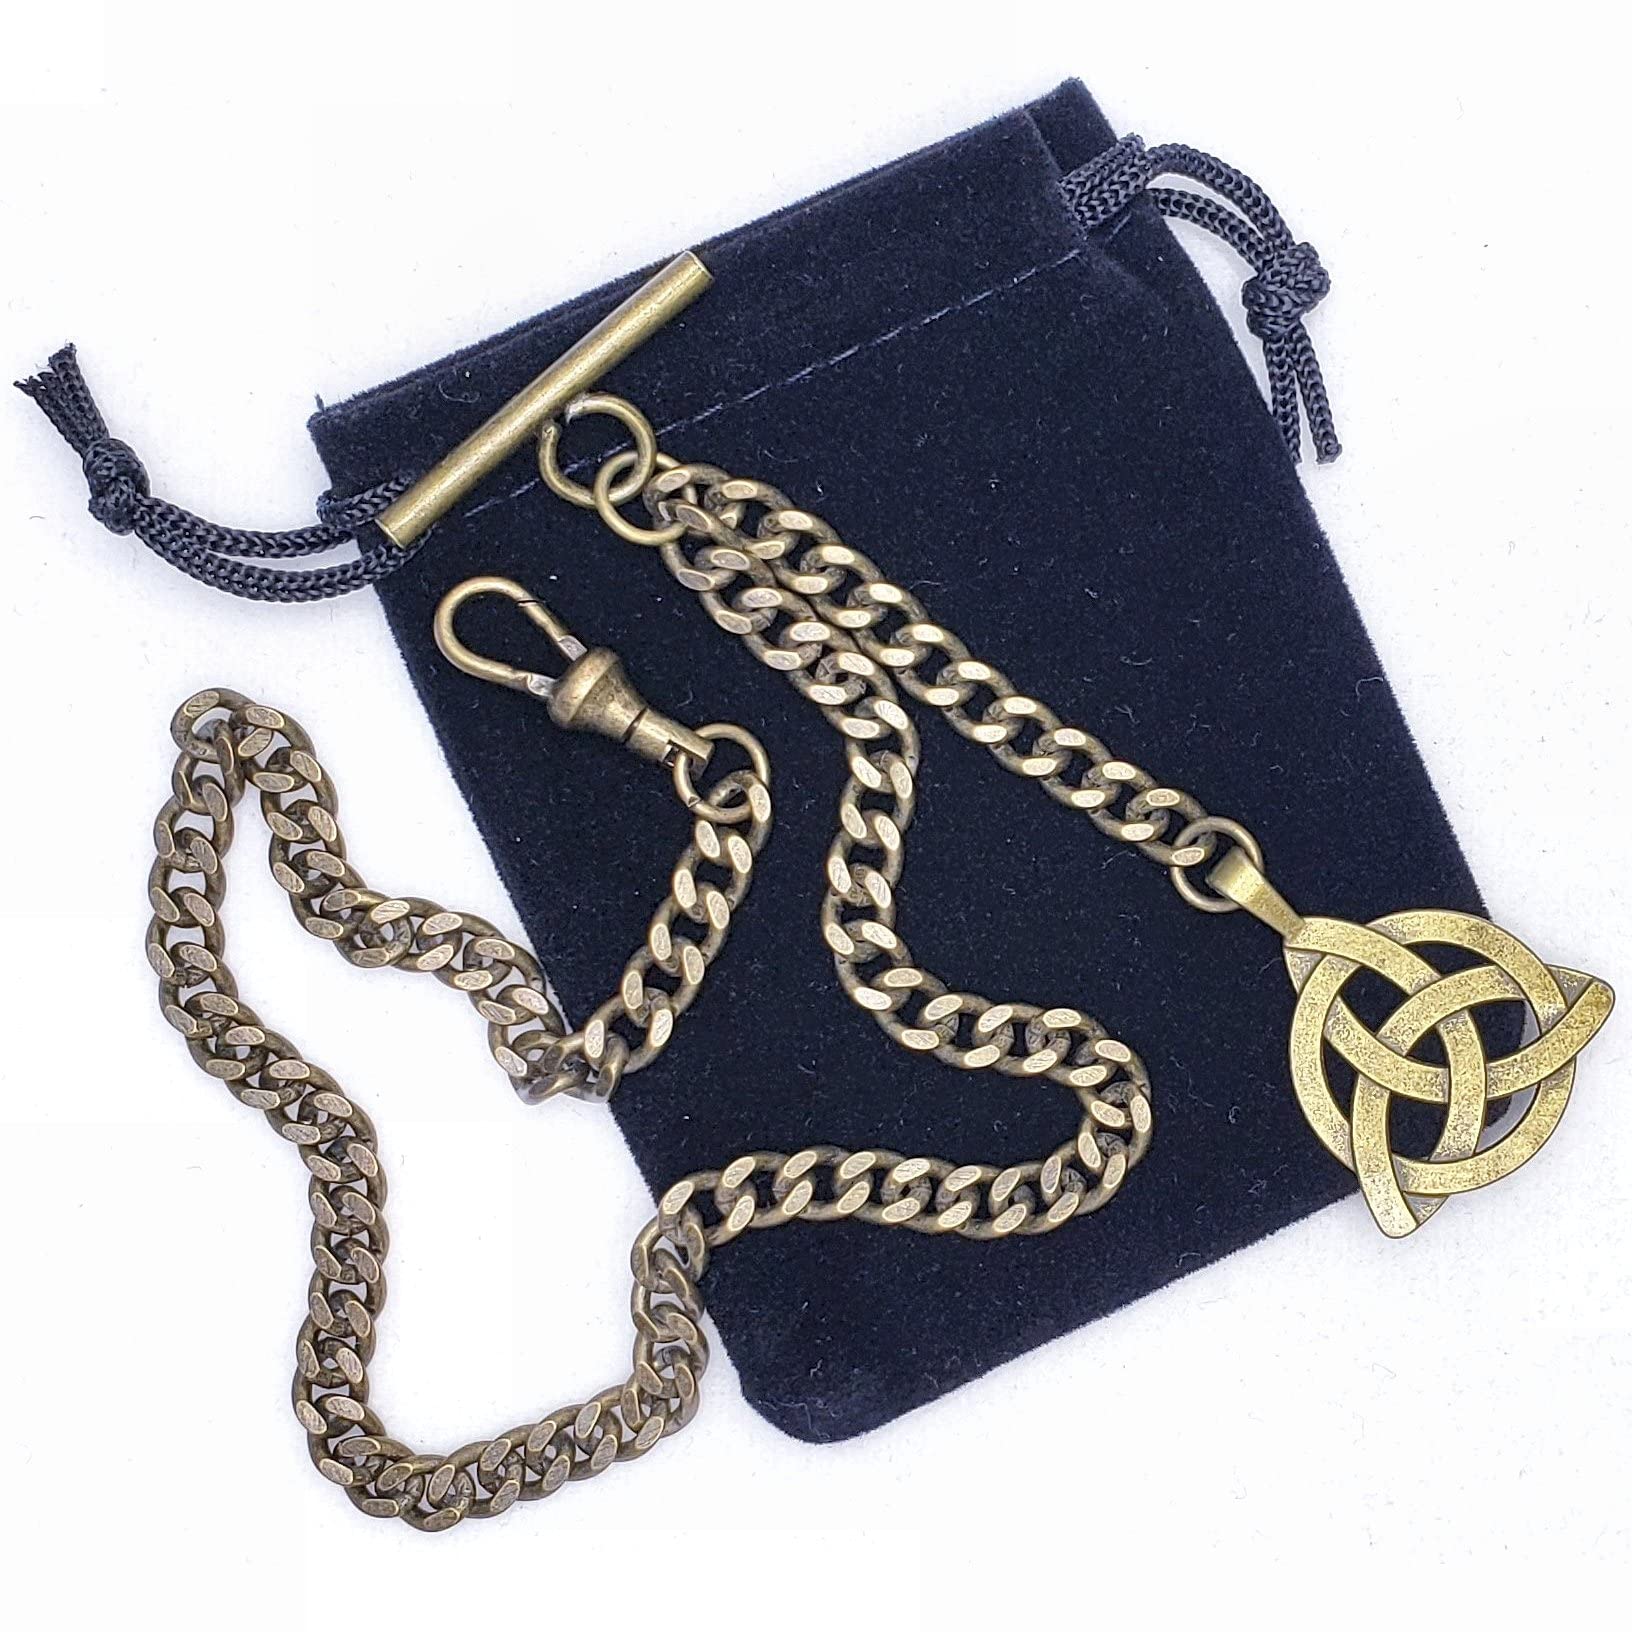 Albert Chain Pocket Watch Chains for Men Antique Brass Plating with Celtic Knot Design Fob T Bar Swivel Clasp AC08